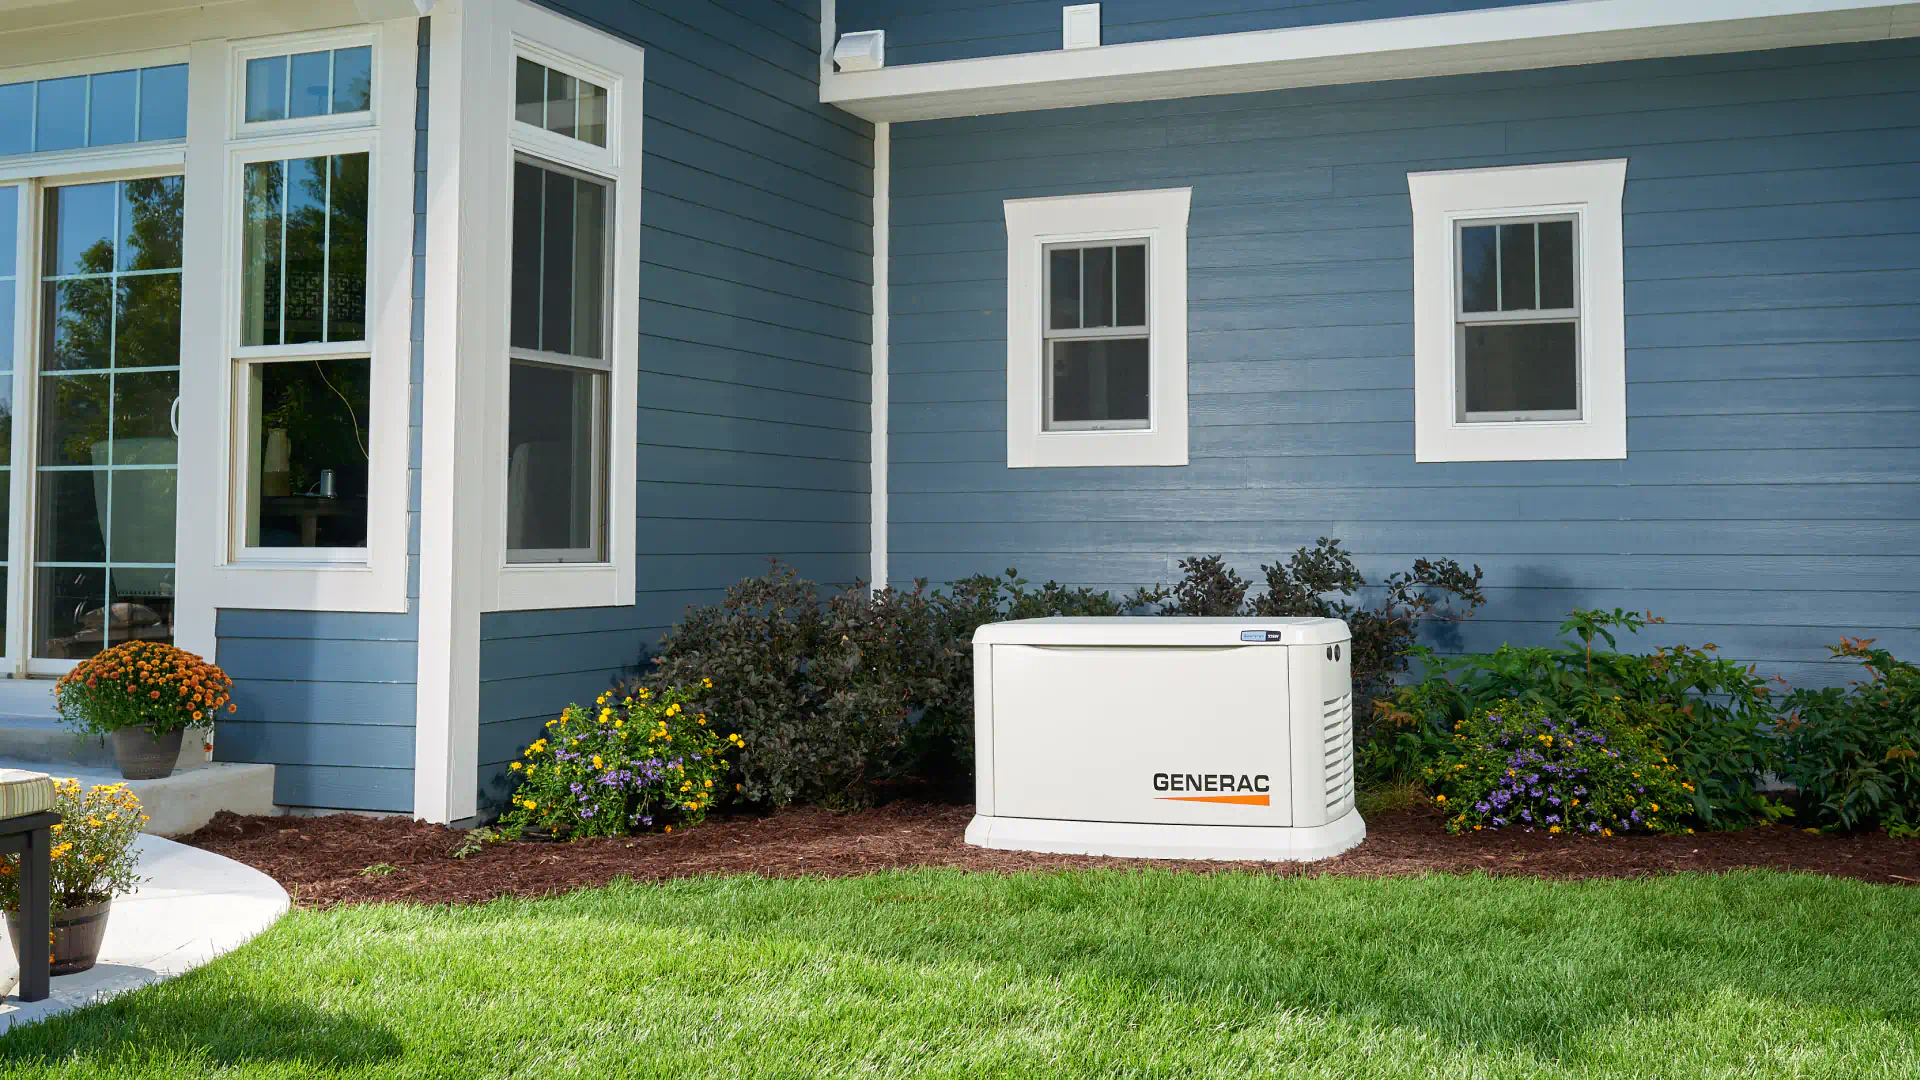 generac generator installed outside of residential house surrounded by beautiful landscape